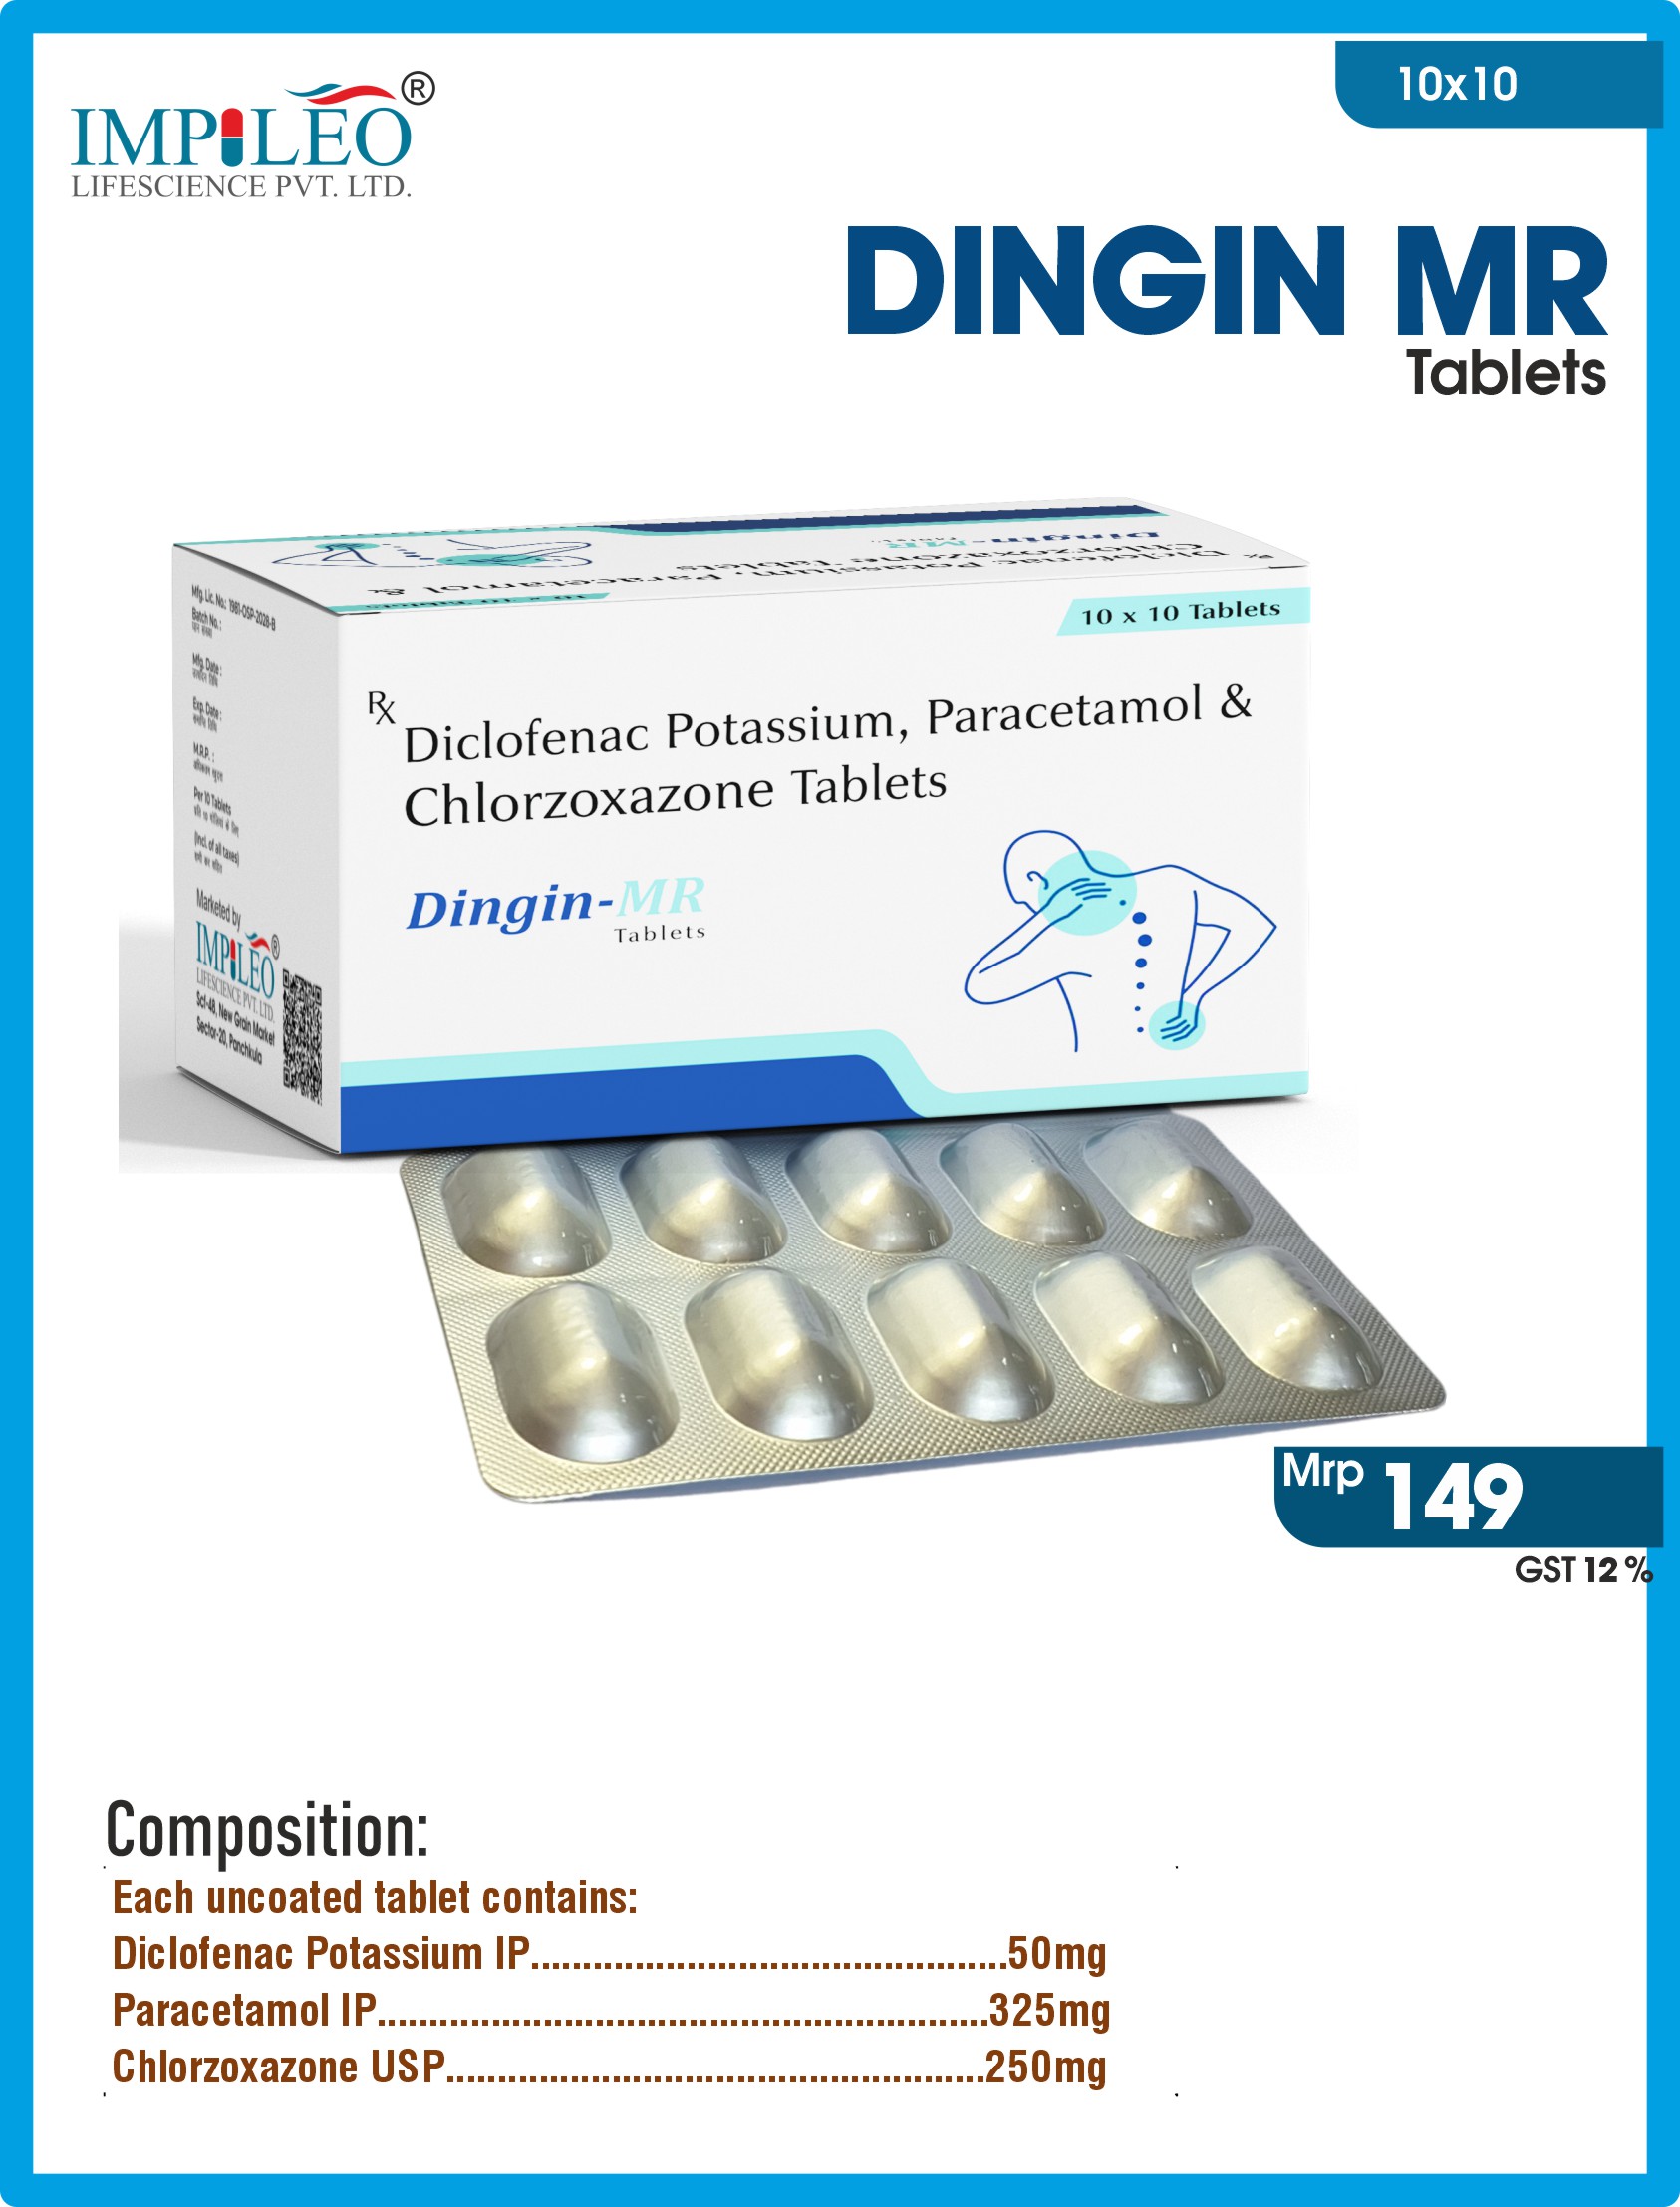 Prioritize Your Health : Discover High-Quality DINGIN MR Tablets from Top PCD Pharma Franchise in Chandigarh